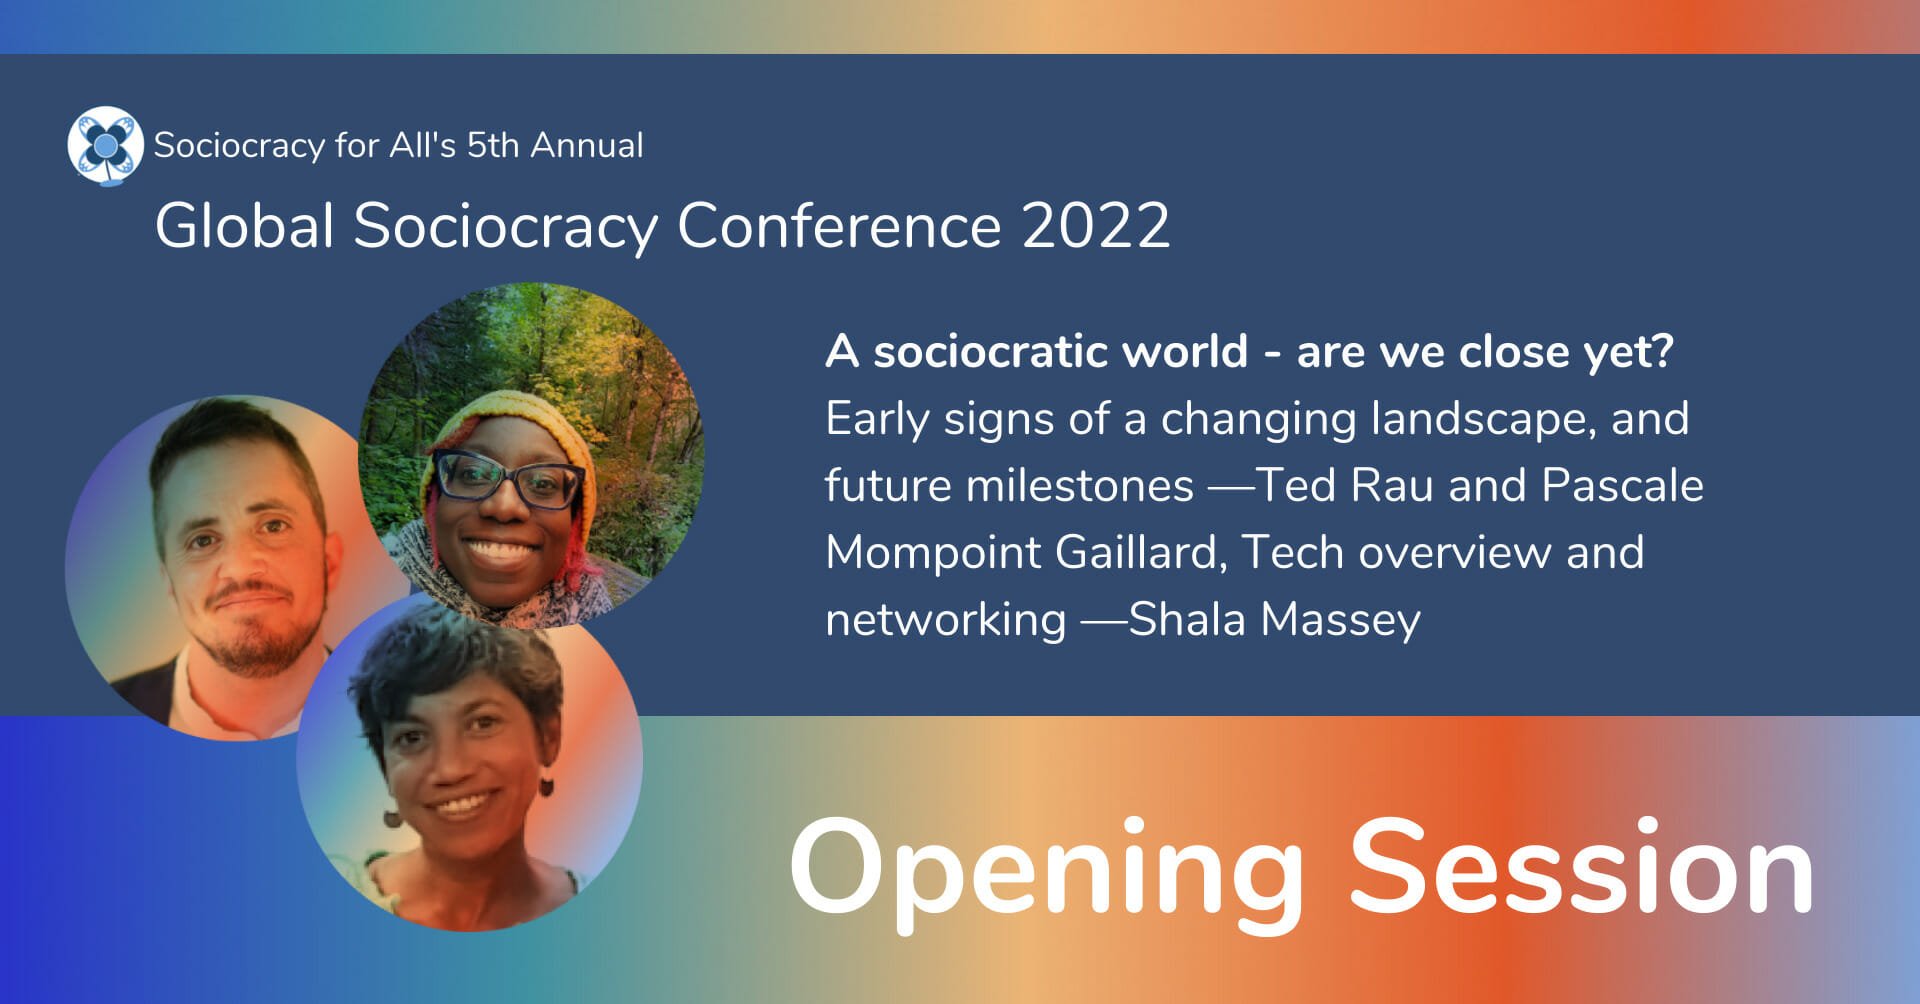 A sociocratic world – are we close yet? Early signs of a changing landscape, and future milestones —Ted Rau and Pascale Mompoint Gaillard, Welcoming and overview —Shala Massey